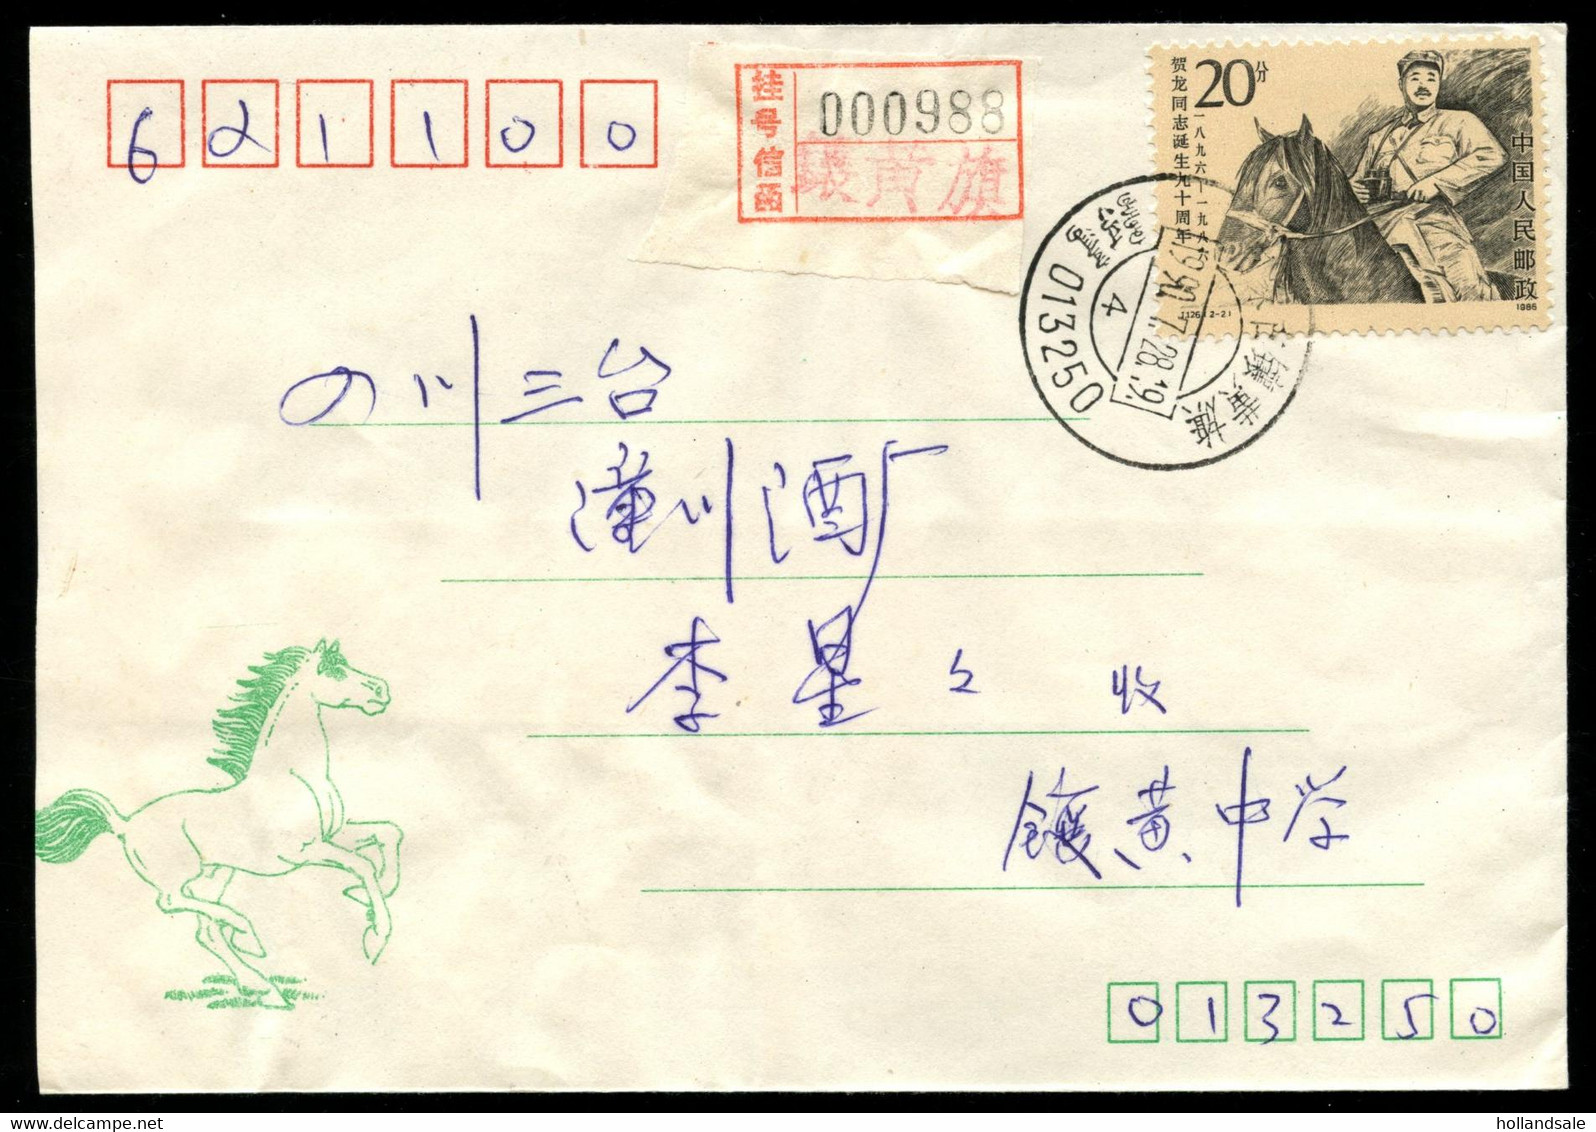 CHINA PRC / ADDED CHARGE - 1990, July 28 Cover Sent From Xianghuangqi To Santai. D&O # 18-0057 - Portomarken